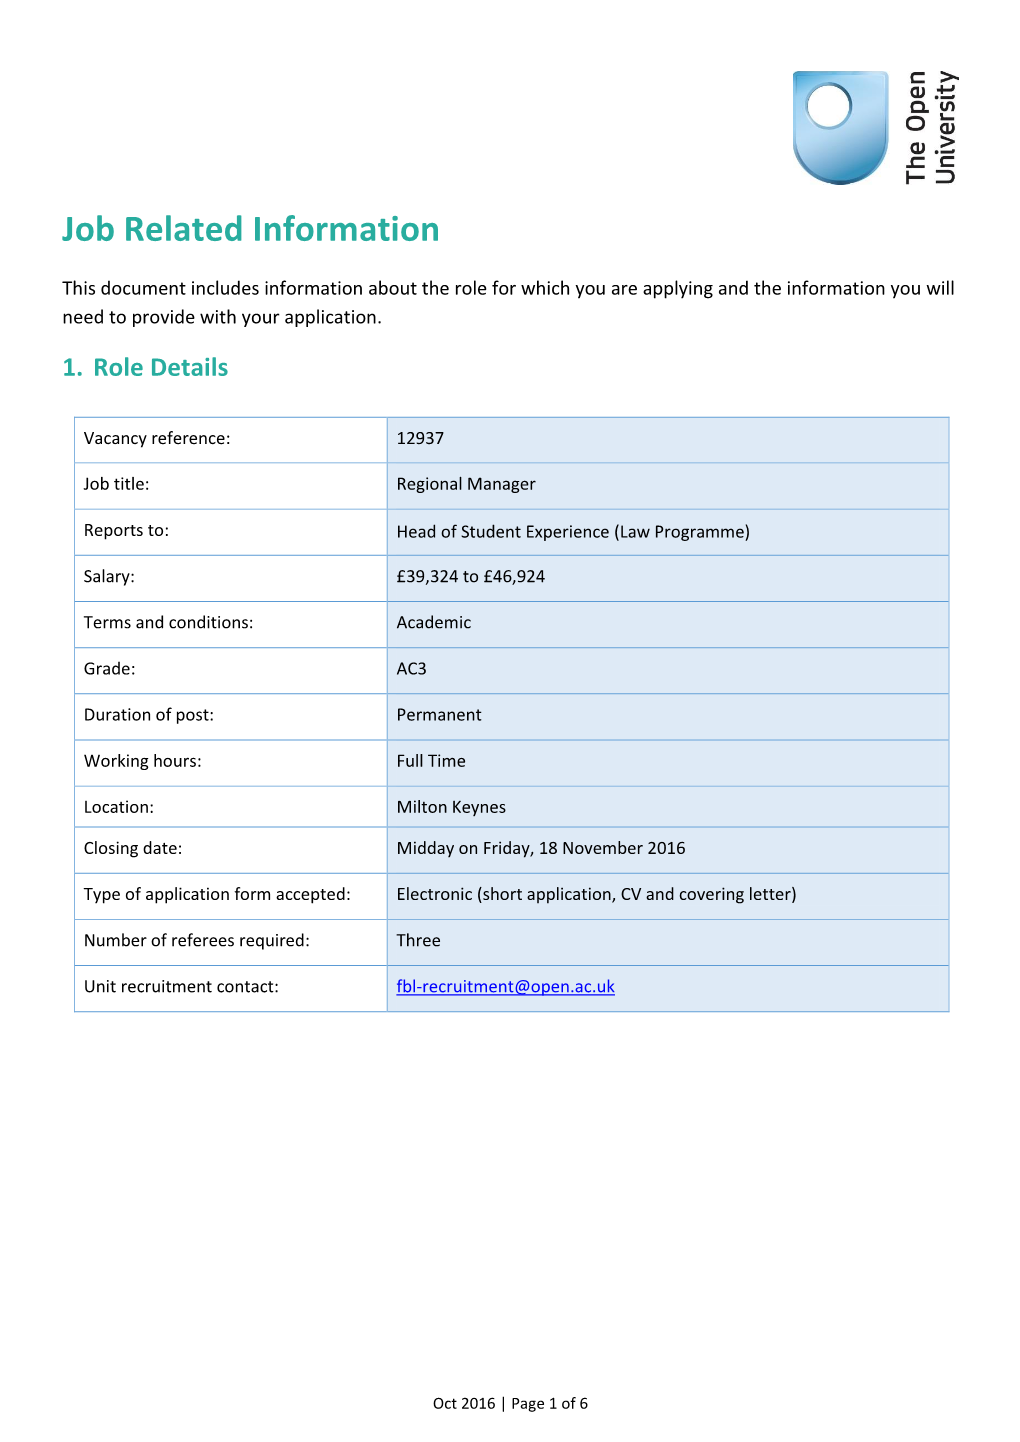 Job Related Information